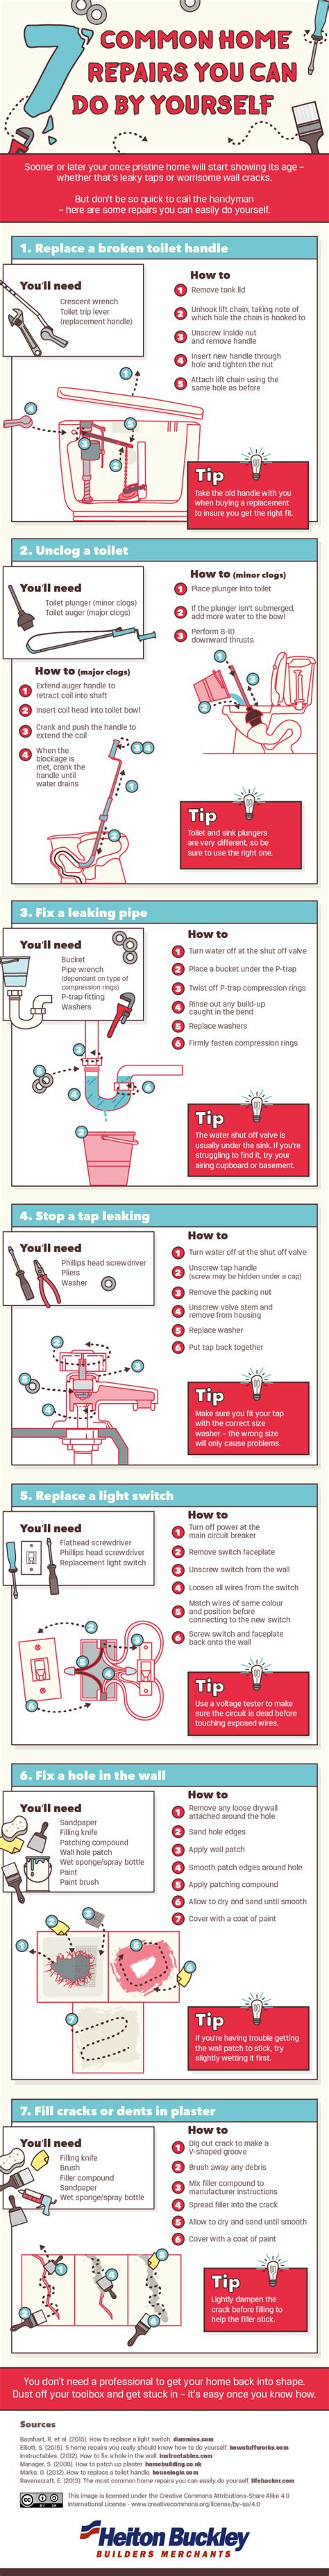 7 Common Home Repairs You Can Do By Yourself Infographic